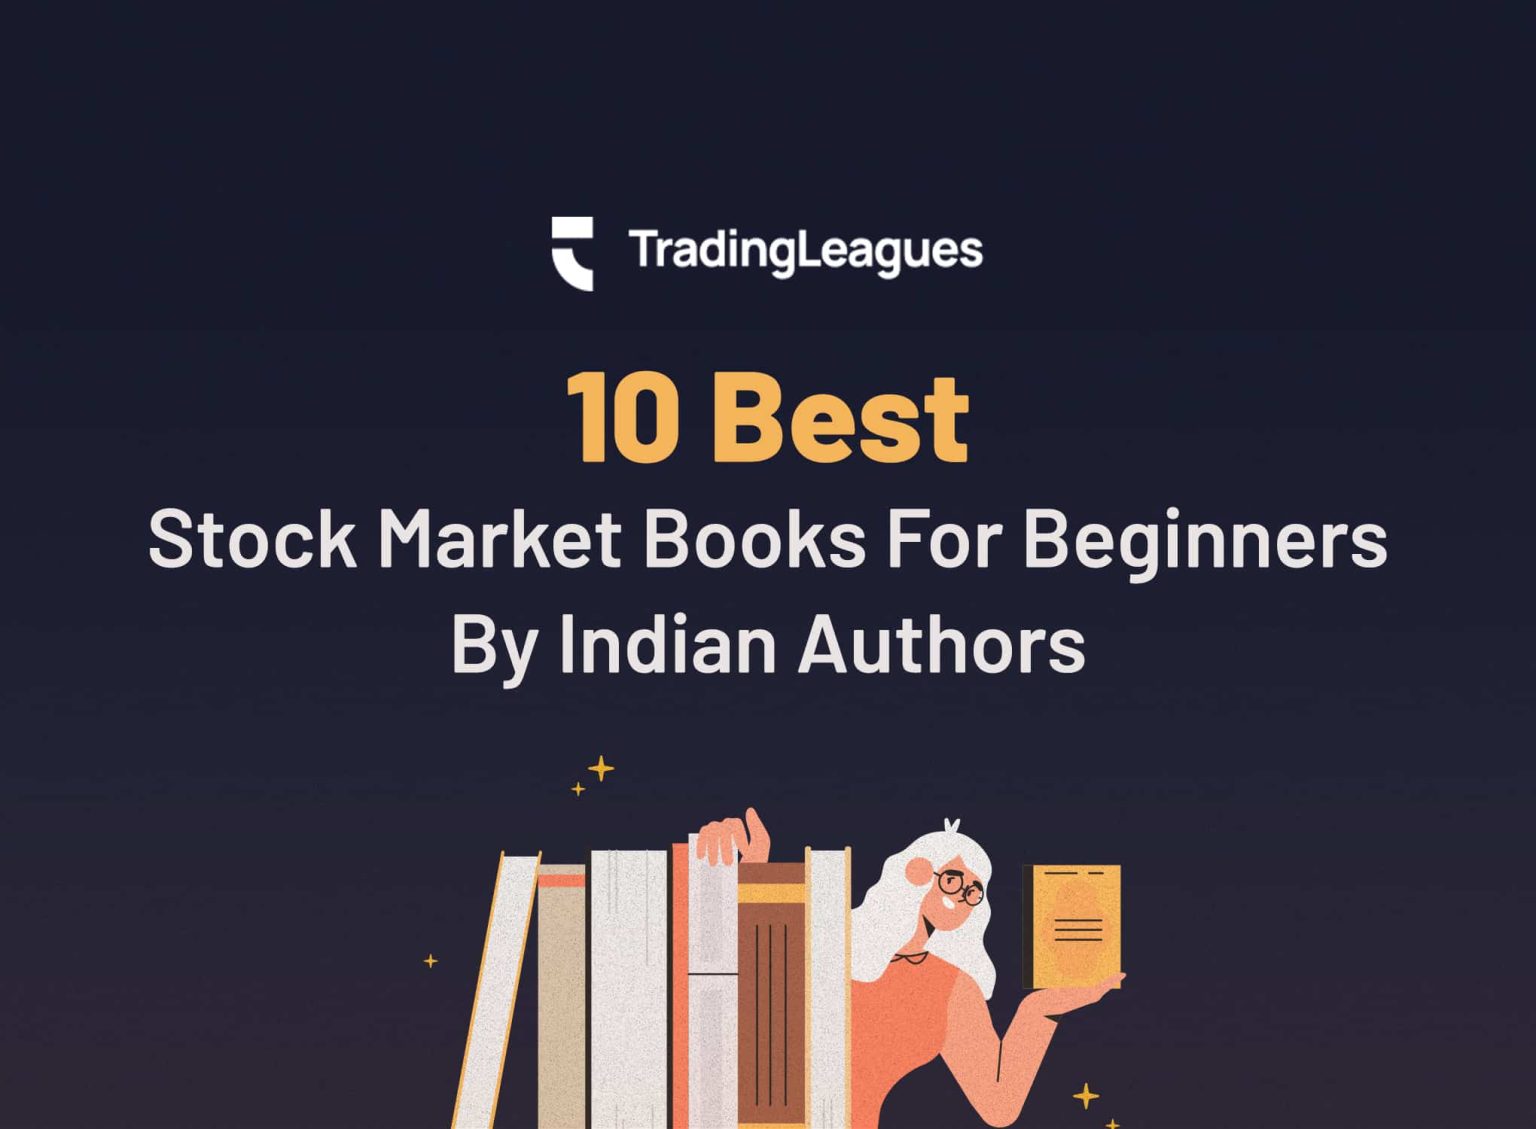 Best Stock Market Books For Beginners By Indian Authors - TradingLeagues